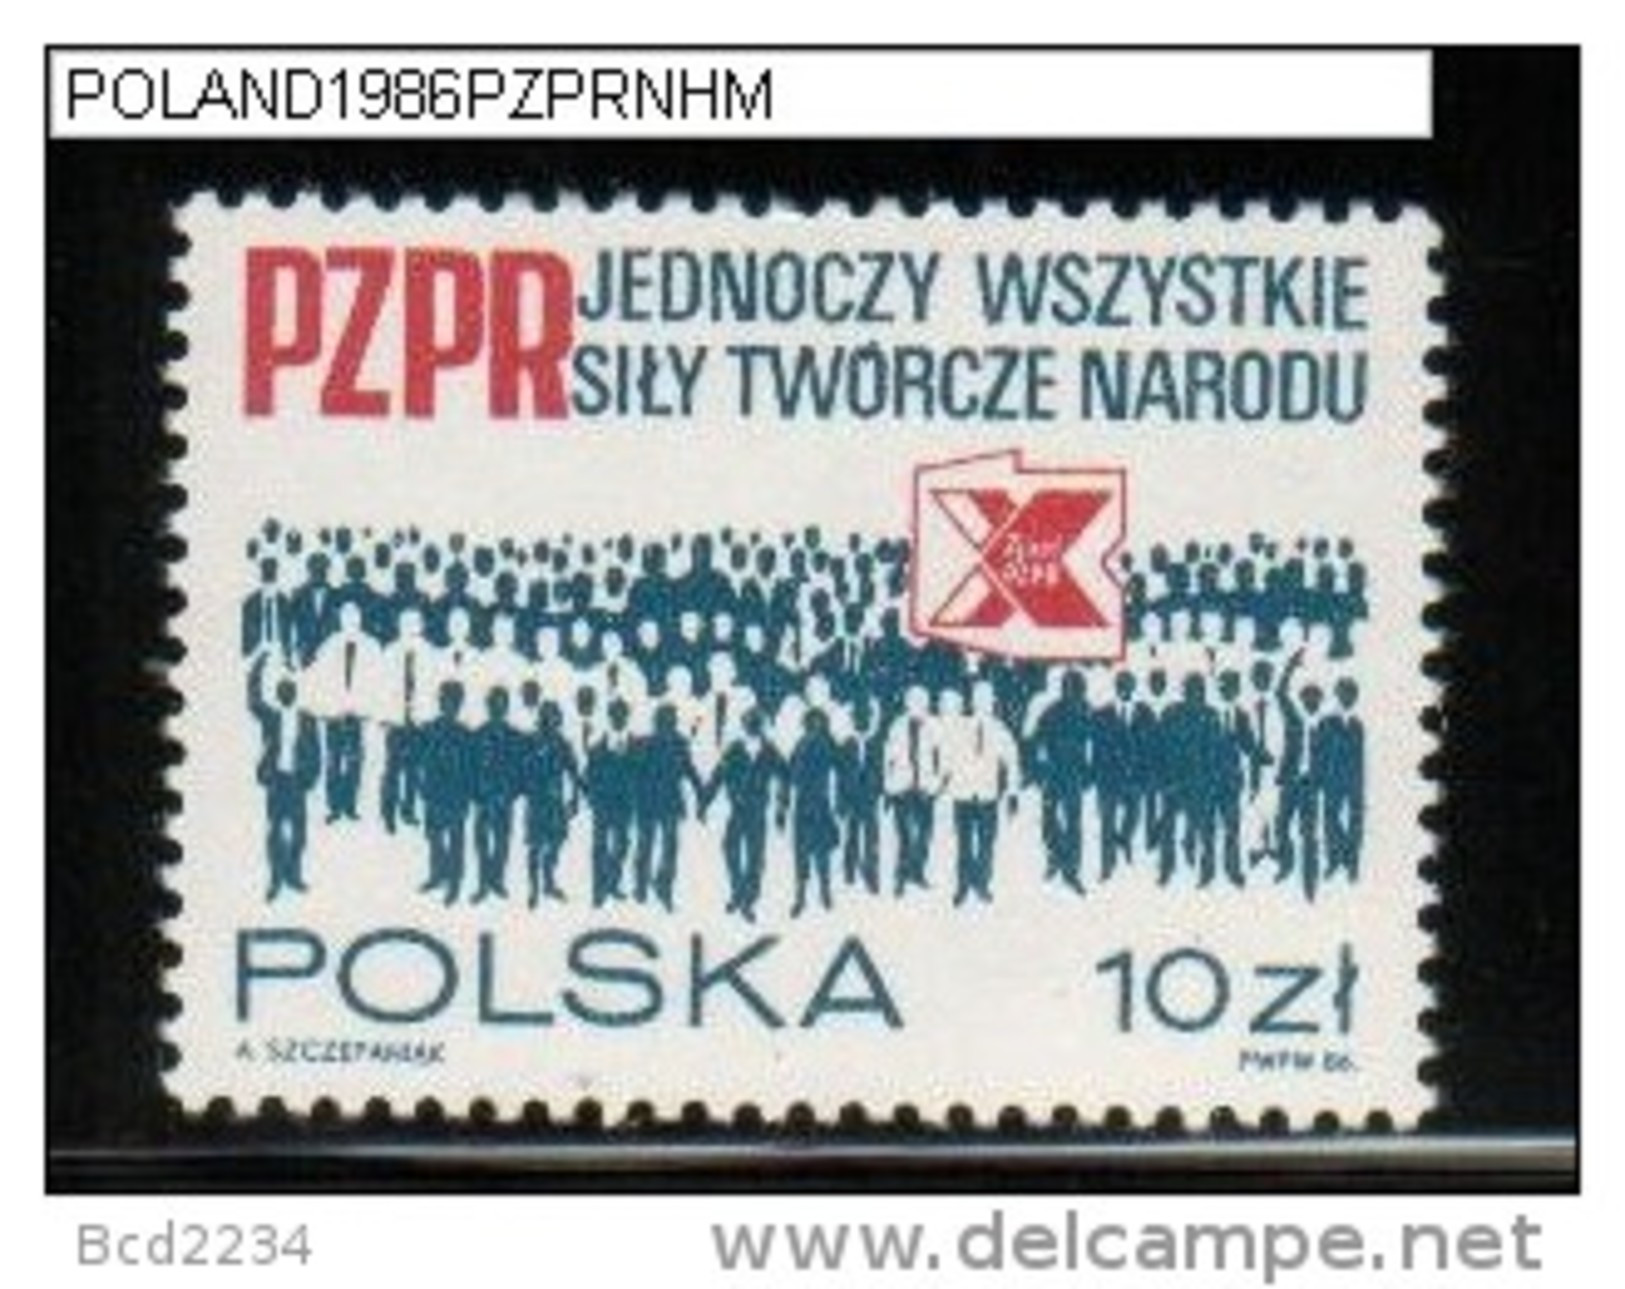 POLAND 1986 10TH PZPR PARTY CONGRESS NHM Polish United Workers Party Communism Socialism Communists Socialists Unions - Nuovi